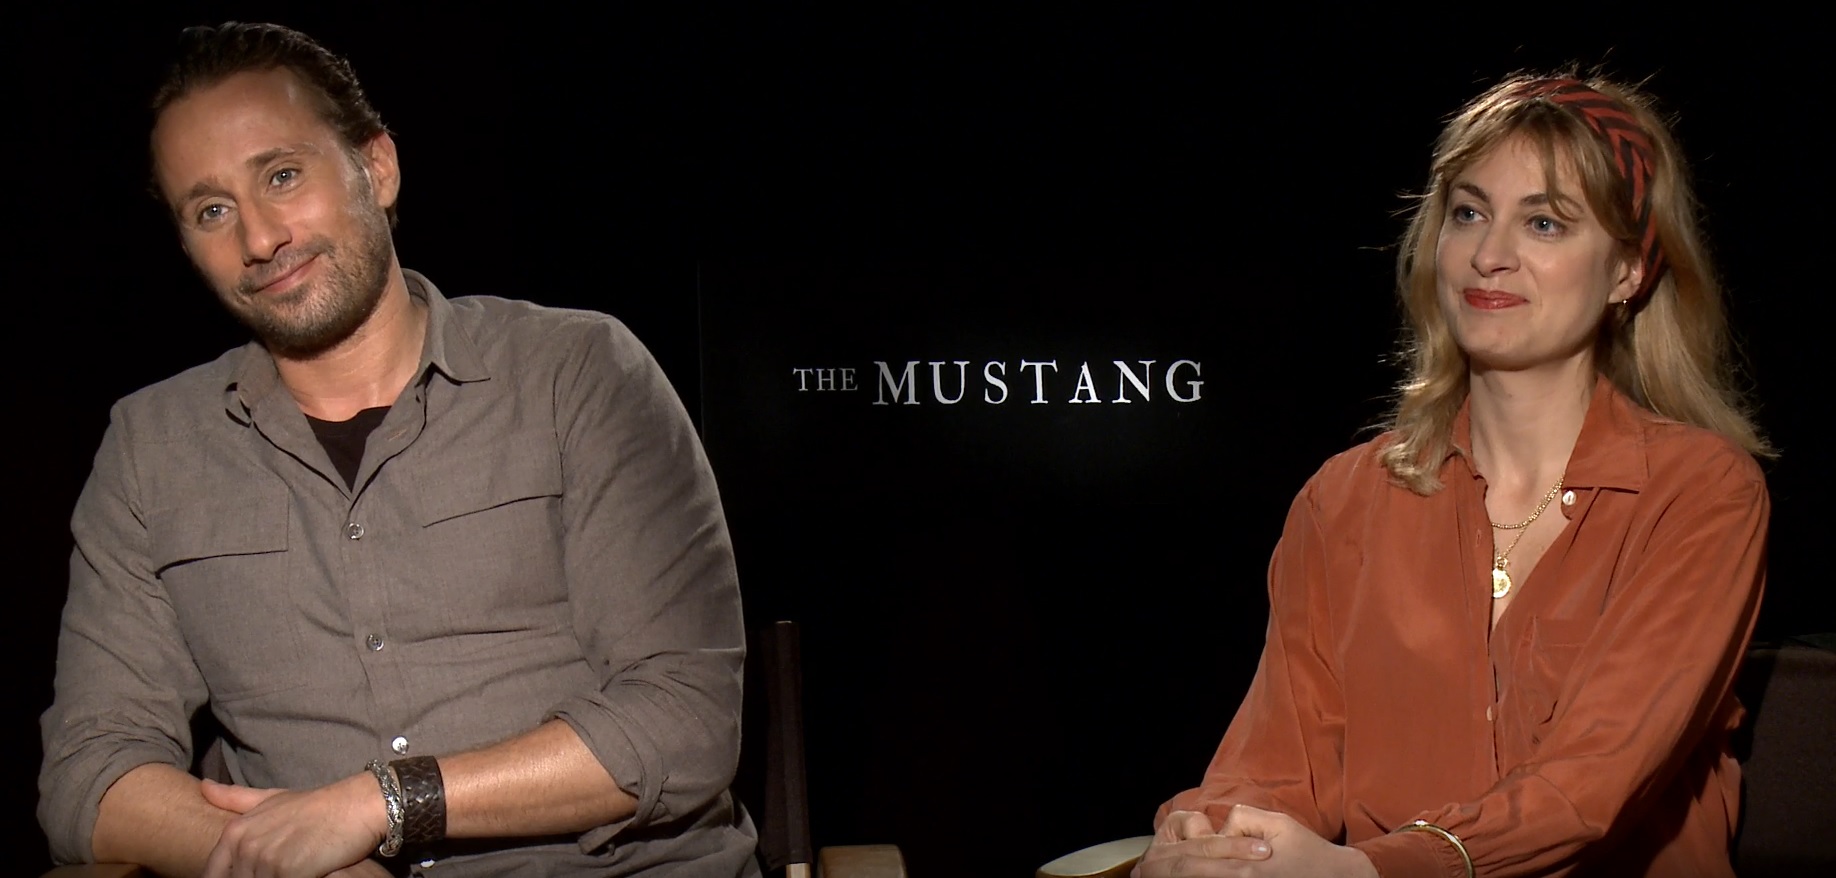 The Mustang: Matthias Schoenaerts and Director Laure de Clarmont-Tonnerre on Prisoners and Horses [Exclusive Interview]